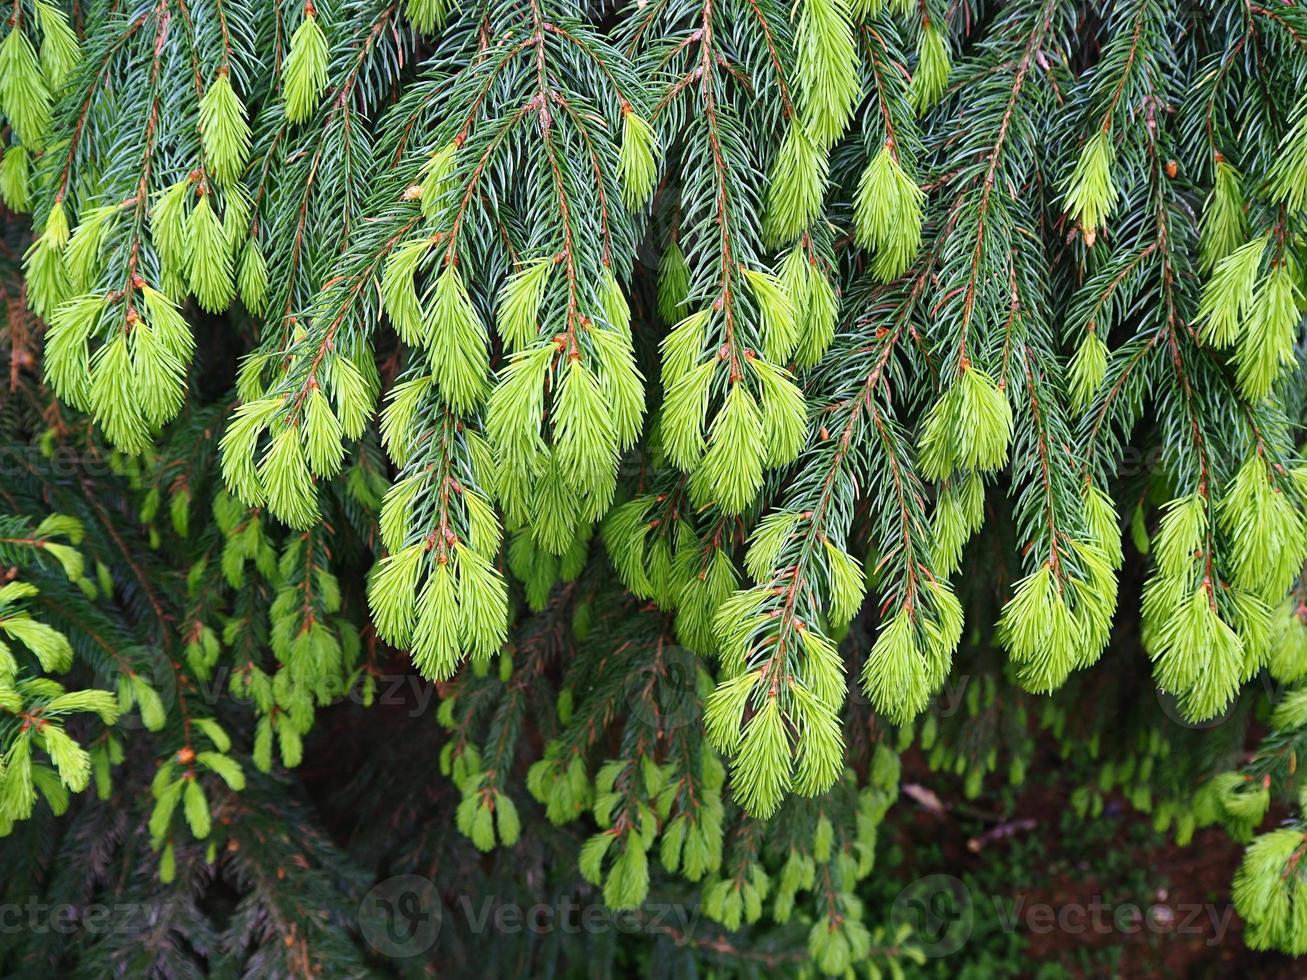 New spring growth on a Norway spruce tree photo